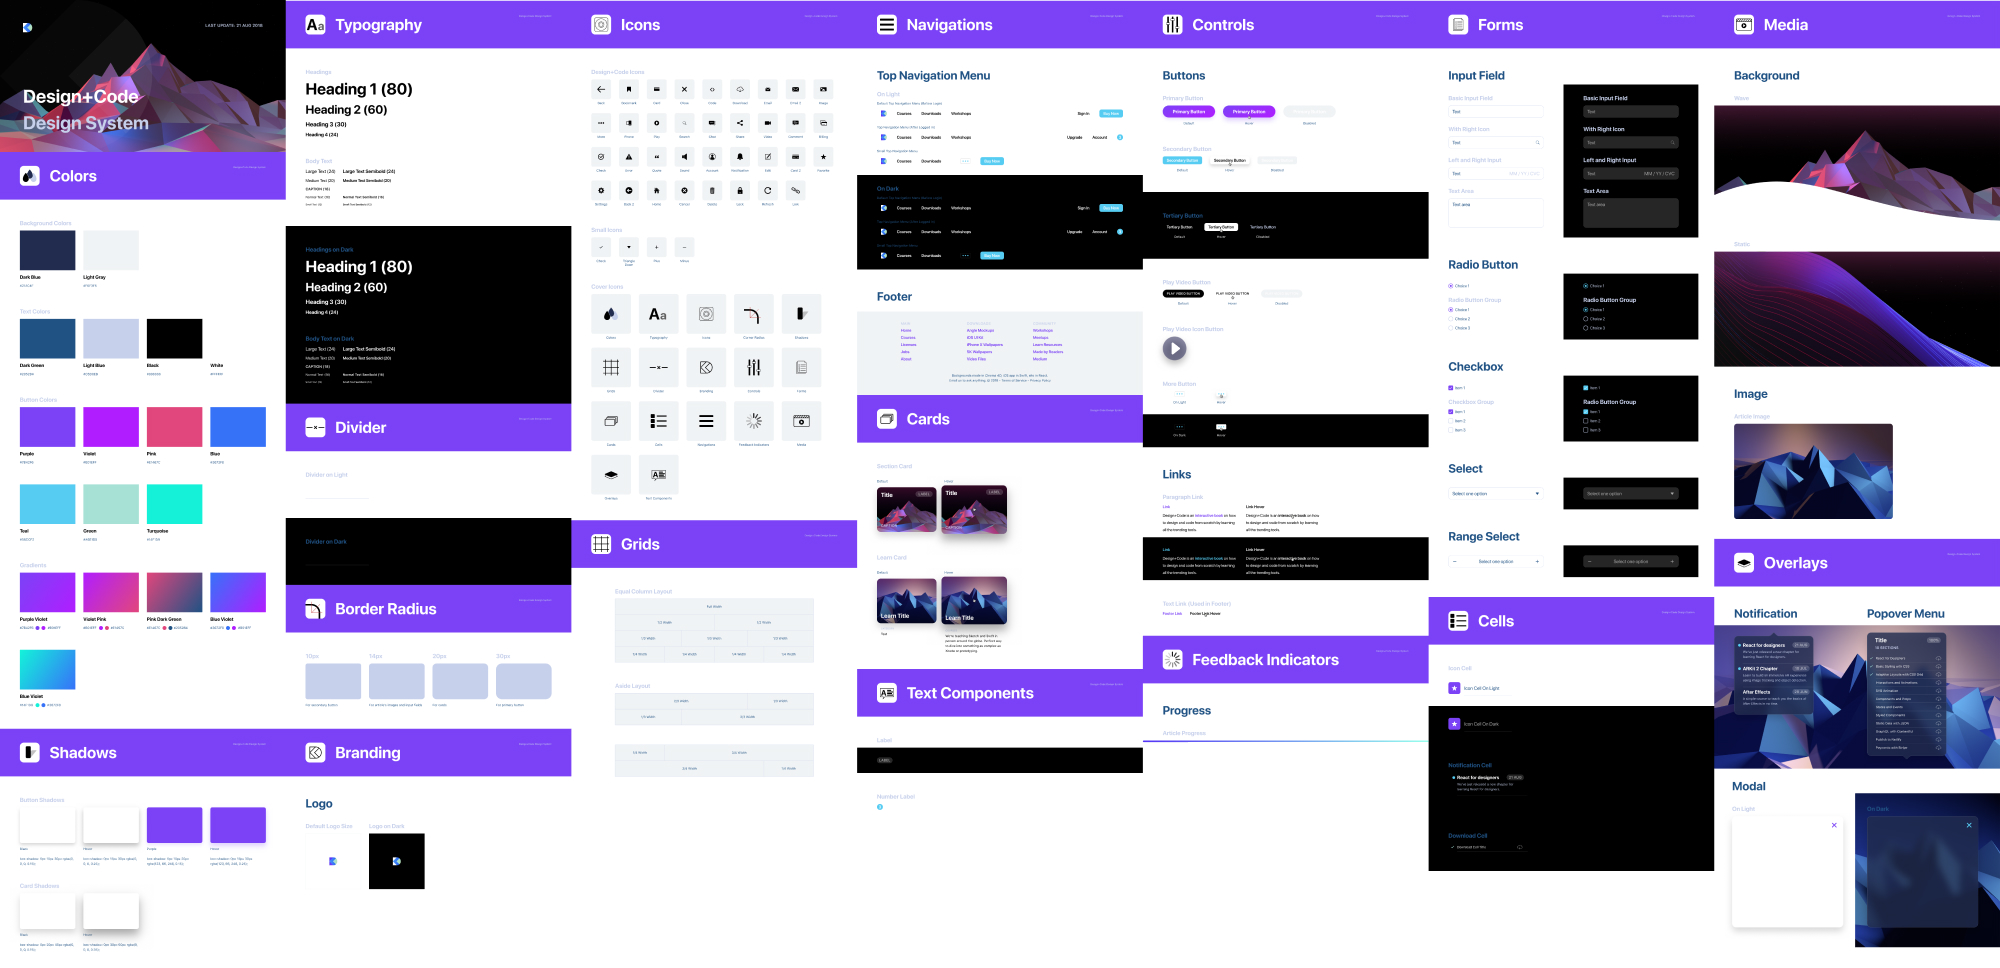 Complete guide to design systems in Figma